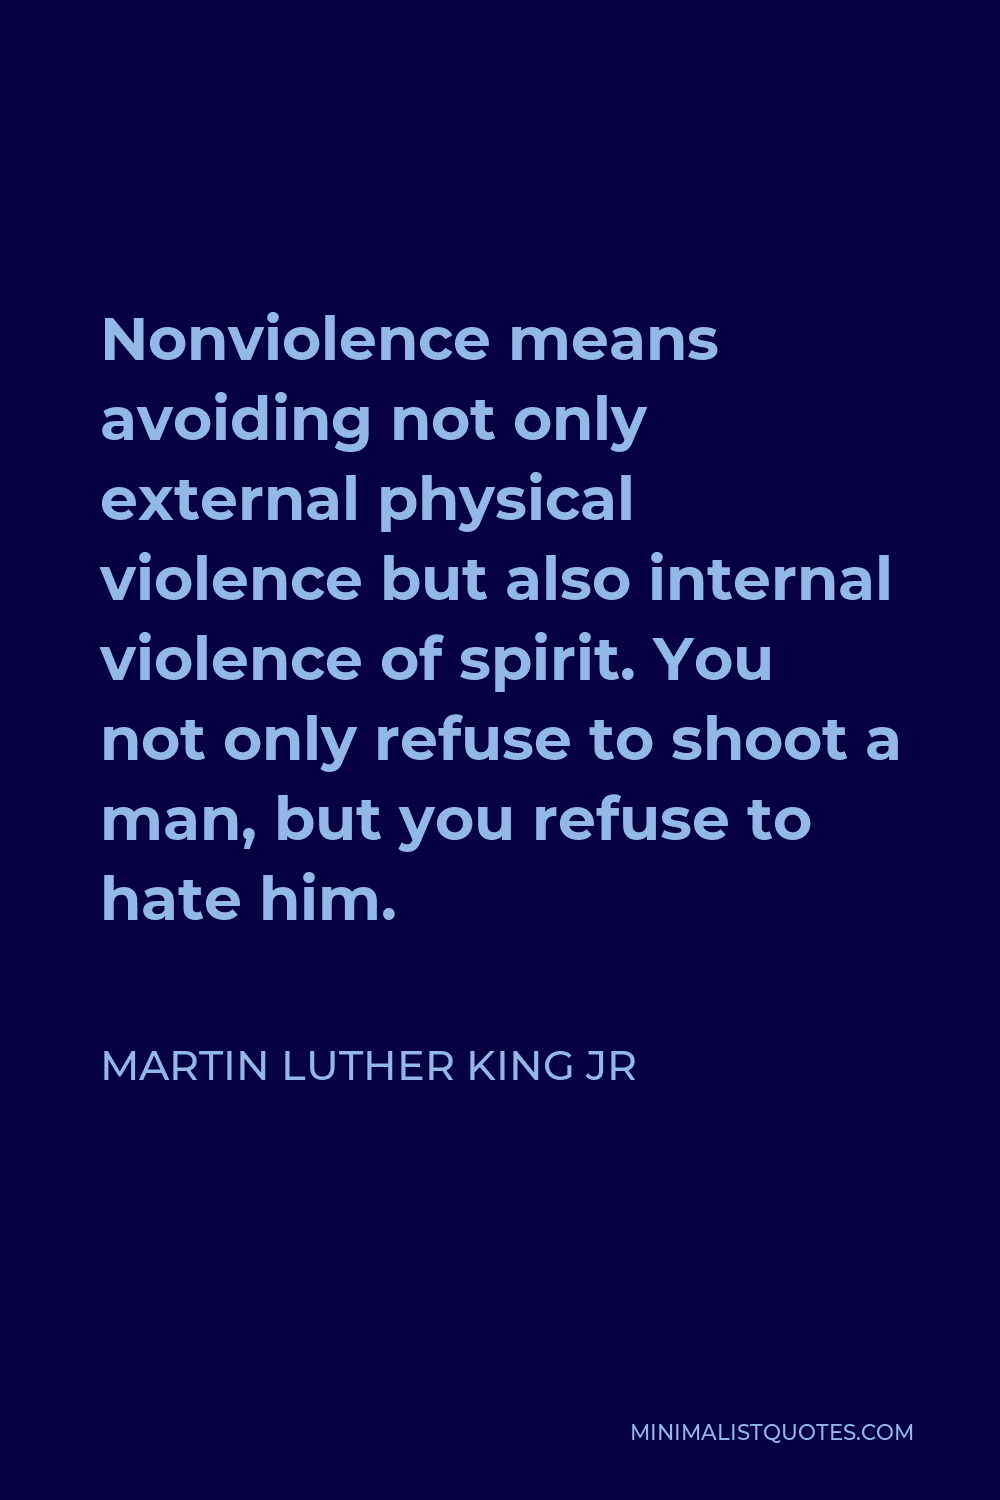 Martin Luther King Jr Quote - Nonviolence means avoiding not only external physical violence but also internal violence of spirit. You not only refuse to shoot a man, but you refuse to hate him.